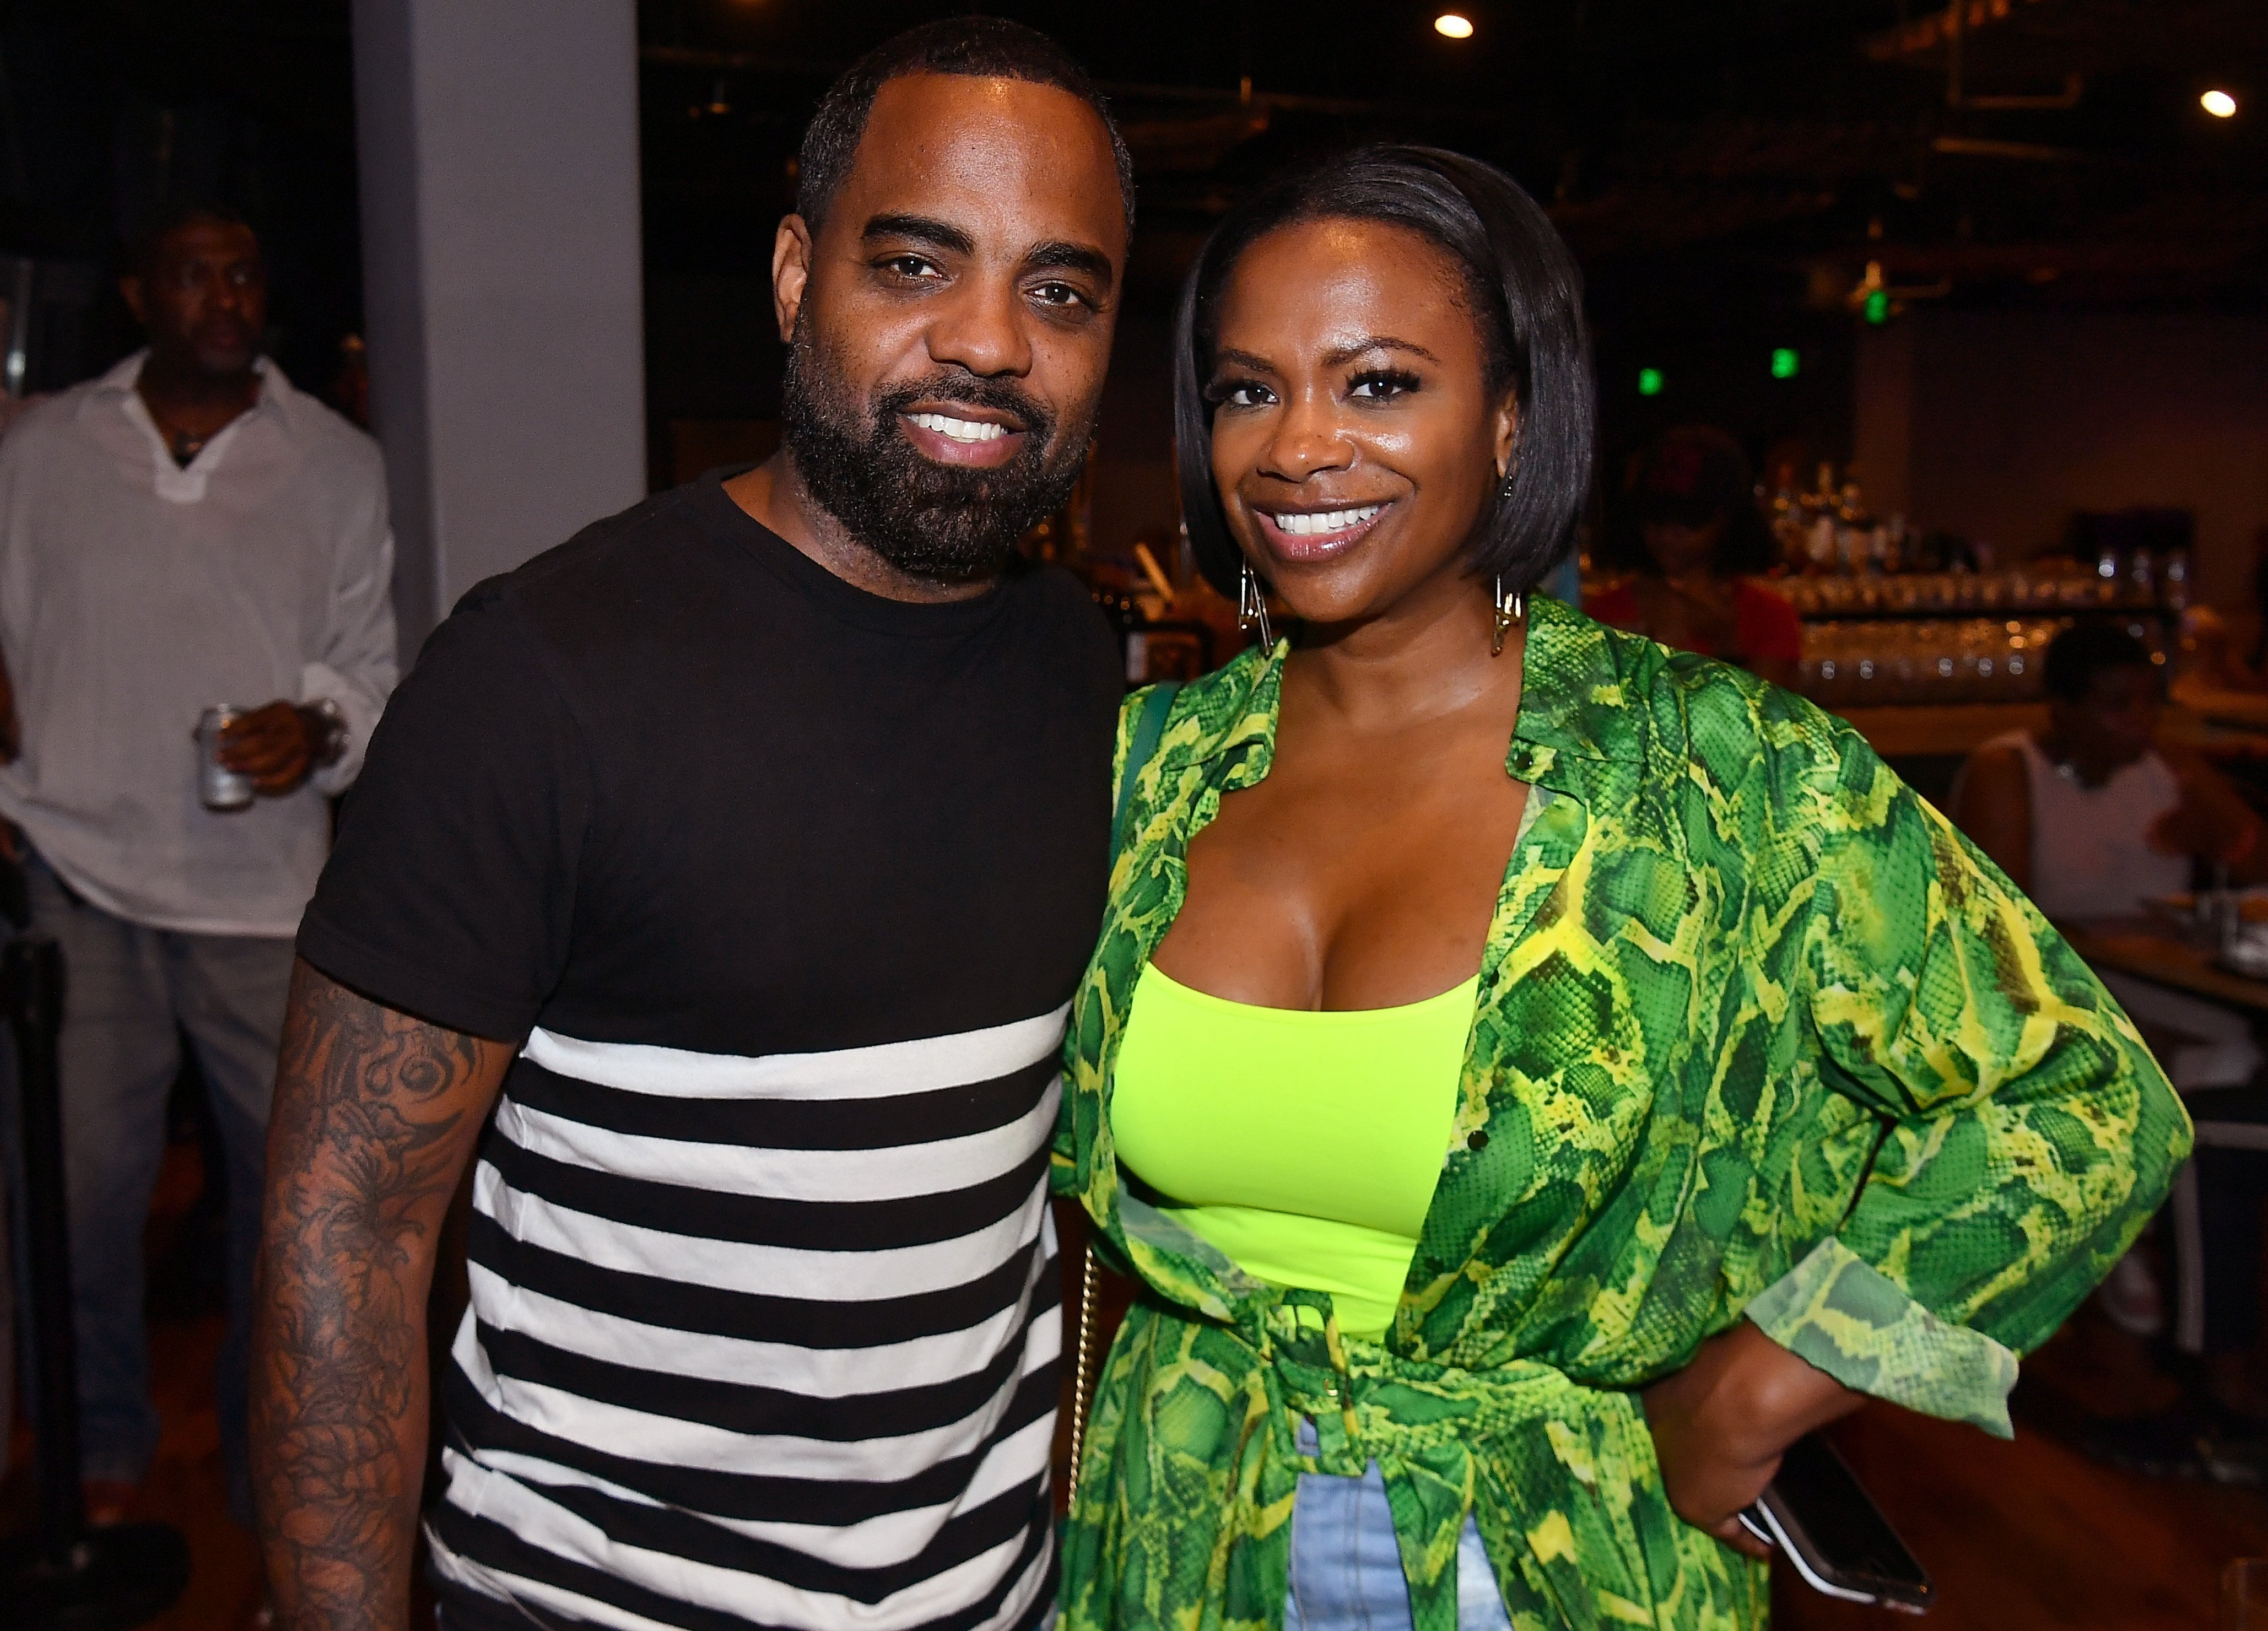 Todd Tucker & Kandi Burruss attend "Majic 107.5 After Dark" in September 2019. | Source: Getty Images